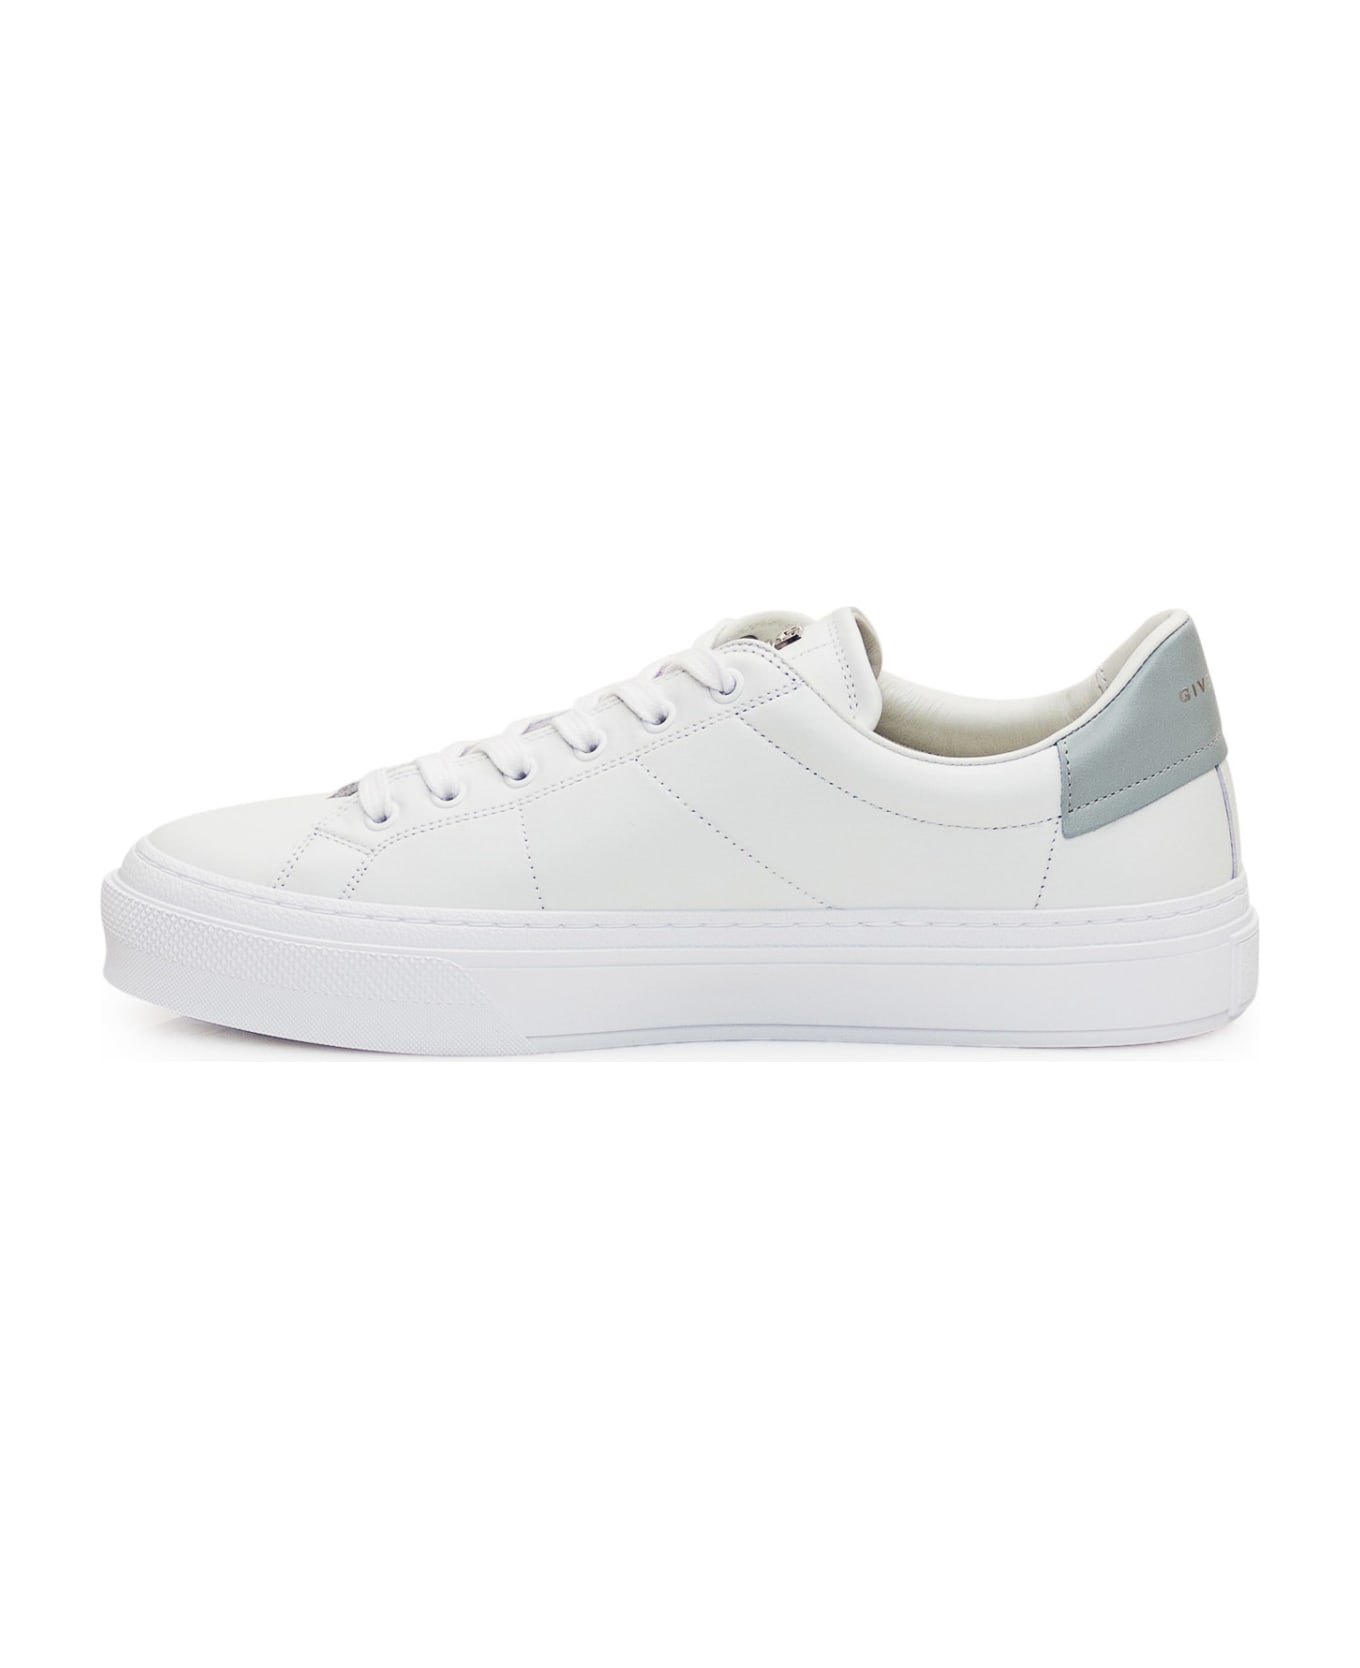 Givenchy City Sport Sneaker - WHITE GREY